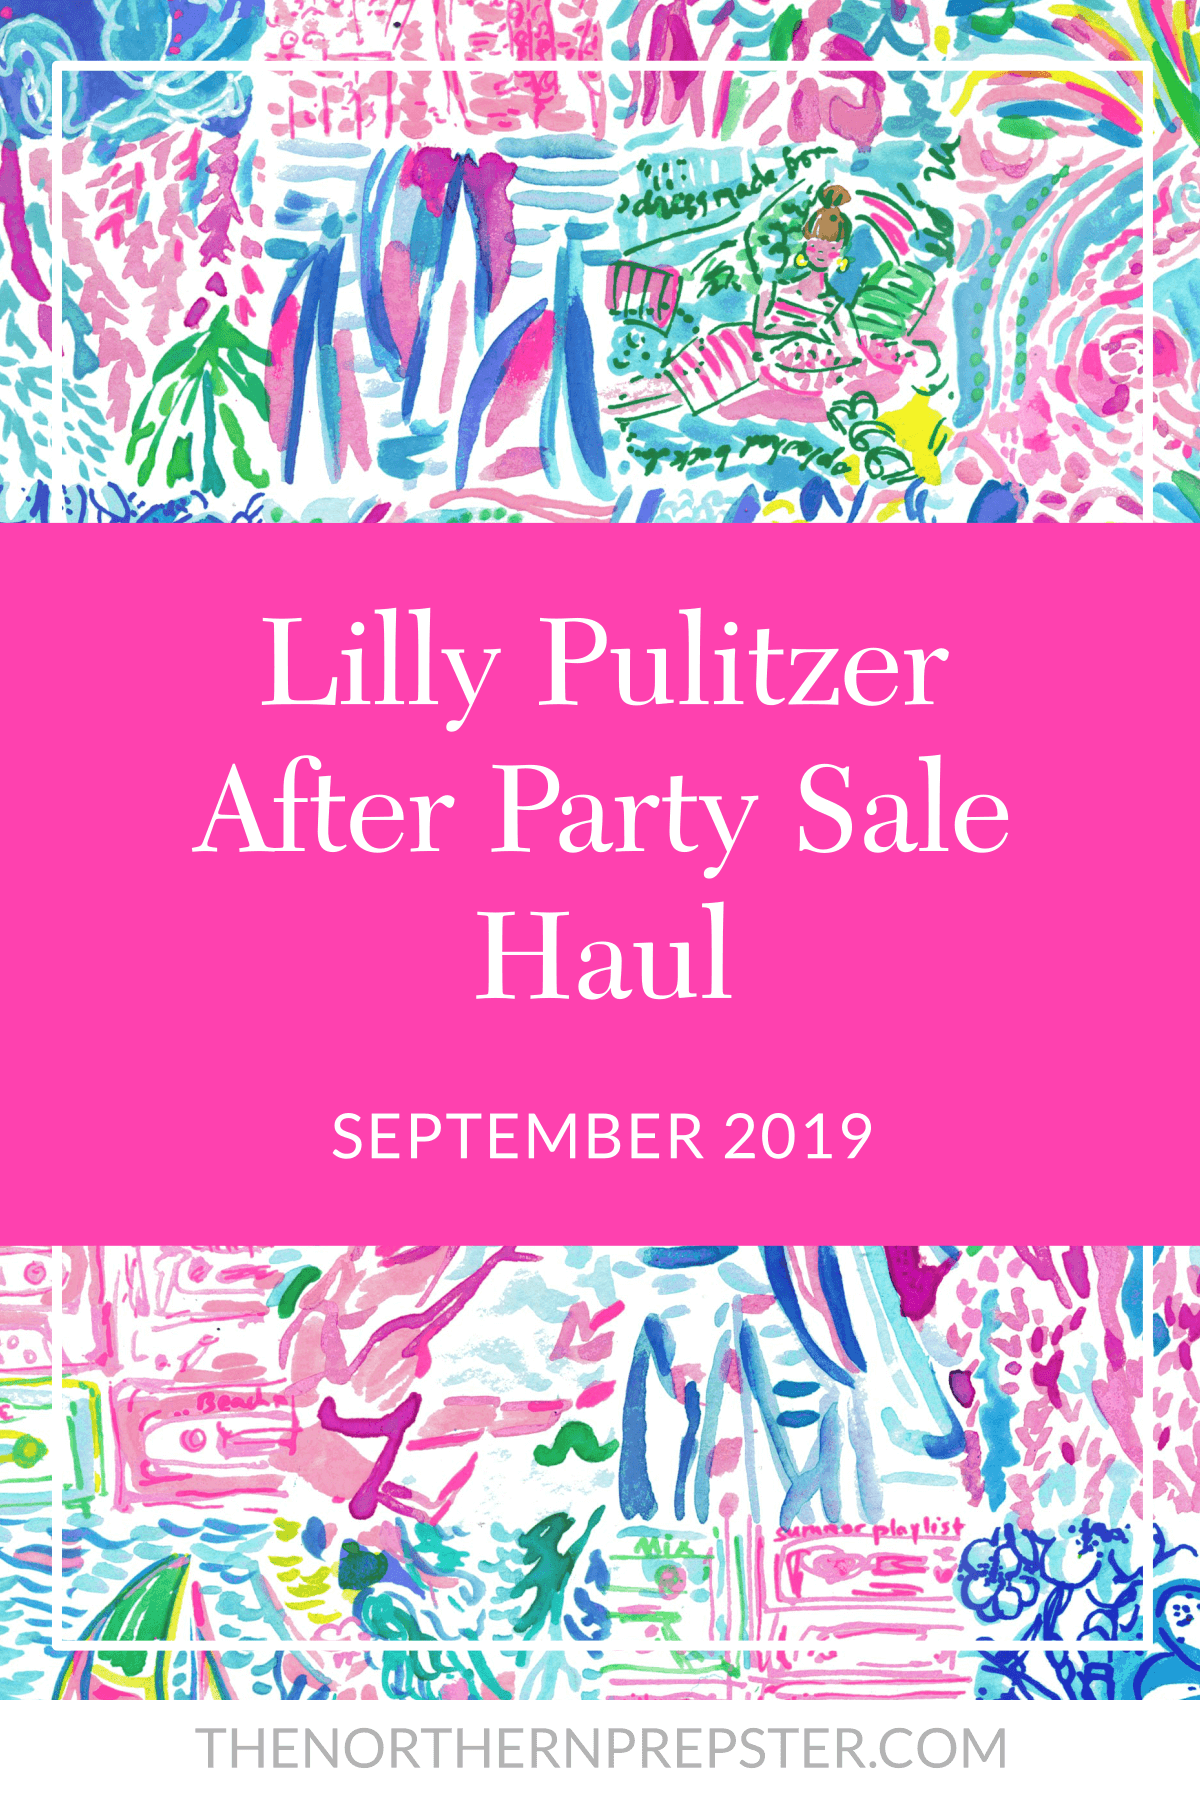 Lilly Pulitzer After Party Sale Haul September 2019 The Northern